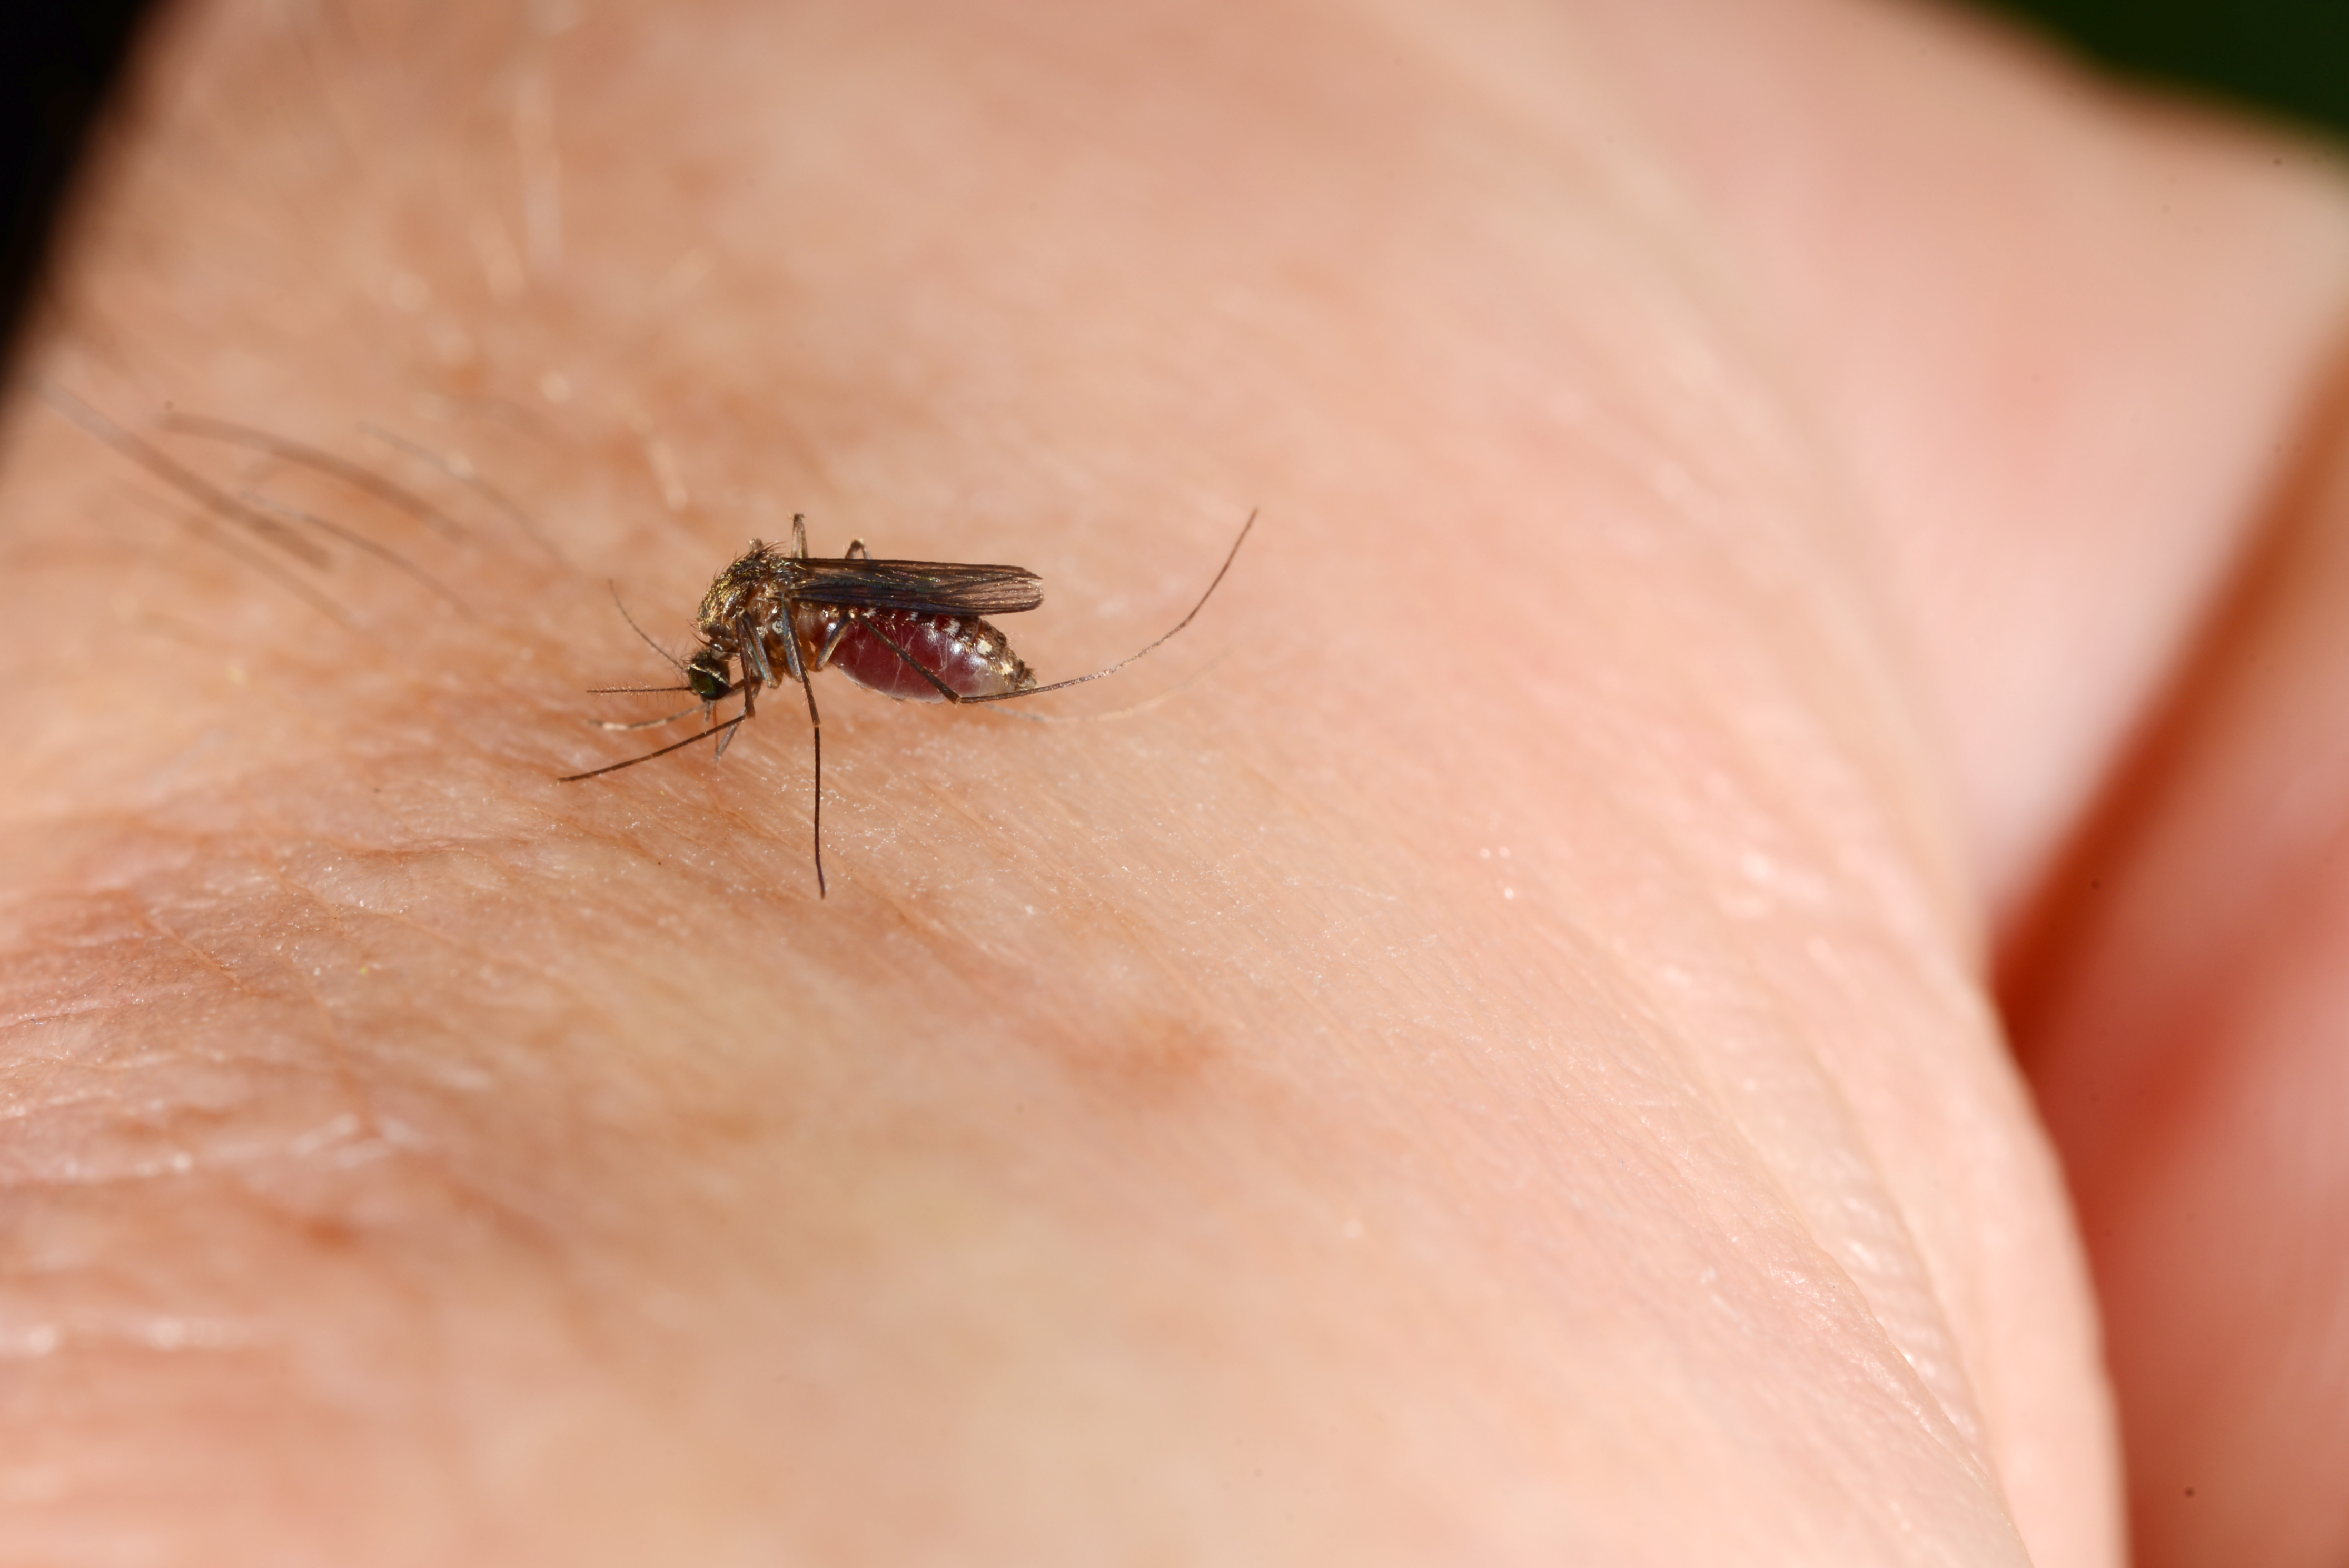 Mosquito engorged with blood while feeding on a human. (Photo credit: John Obermeyer)